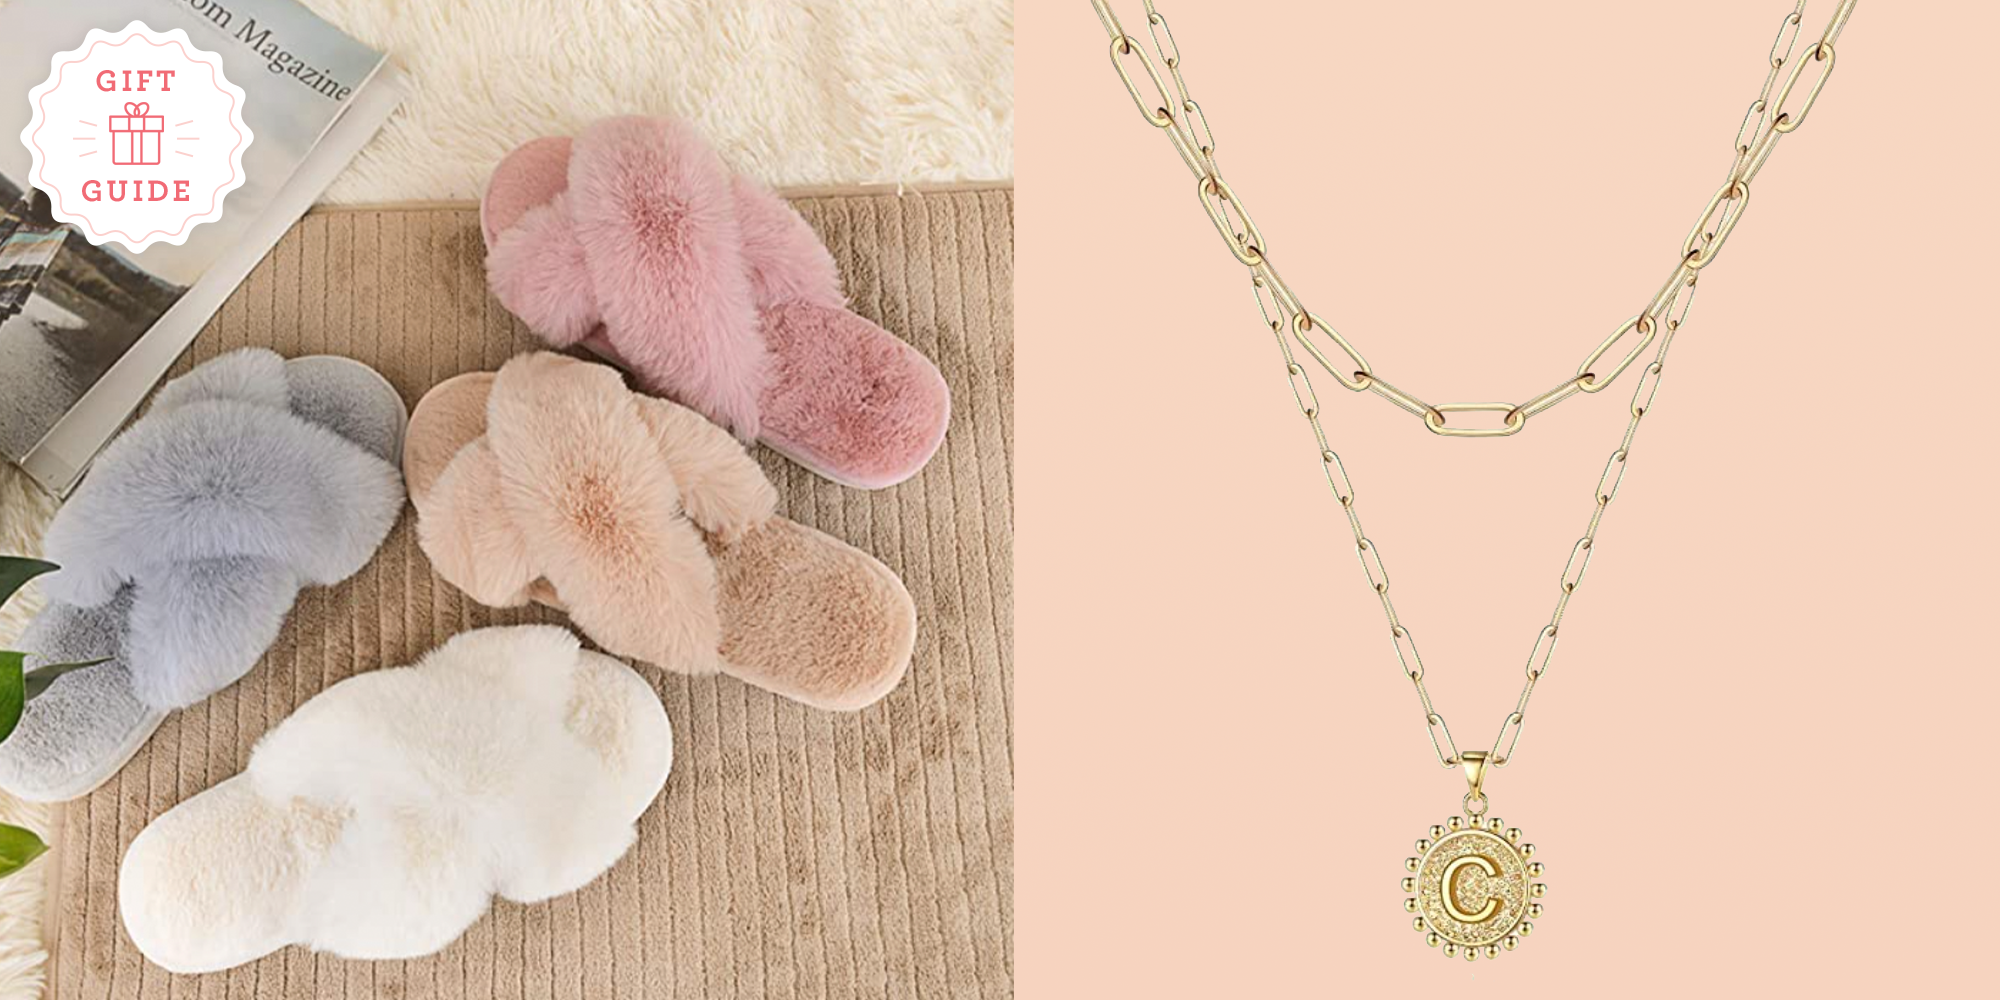 Last-minute Christmas gifts: Crossband slippers and a layered initial necklace.